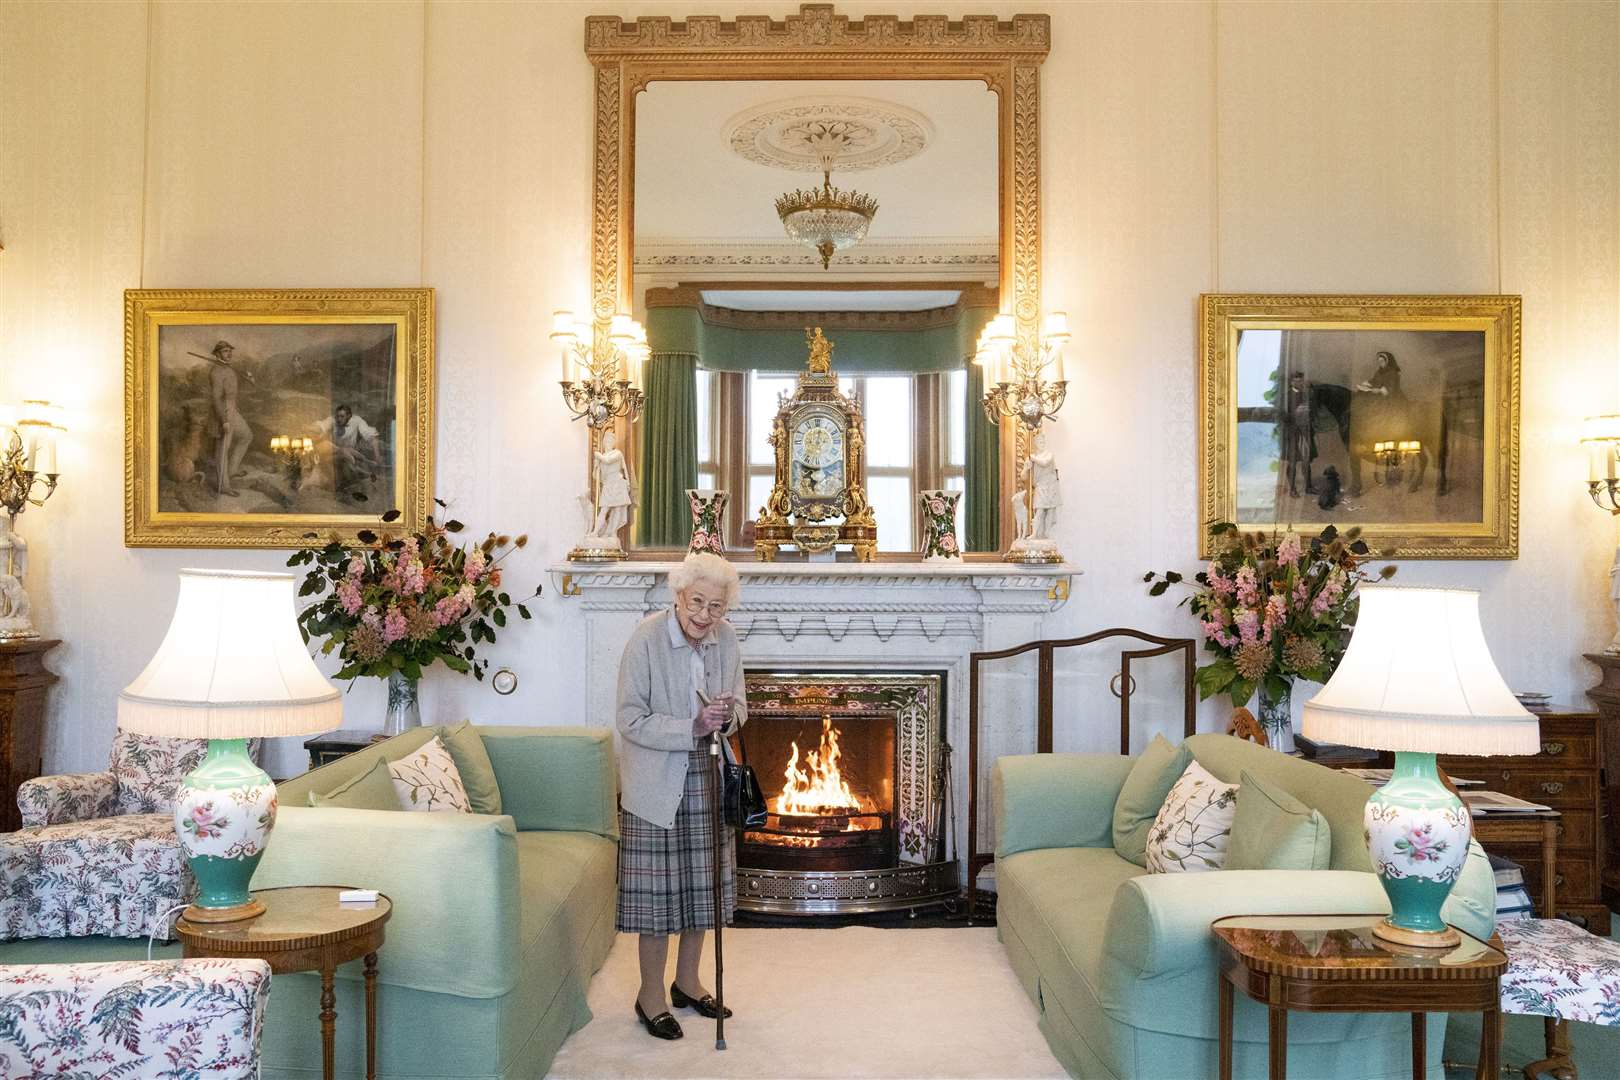 The Queen at Balmoral on Tuesday (Jane Barlow/PA)